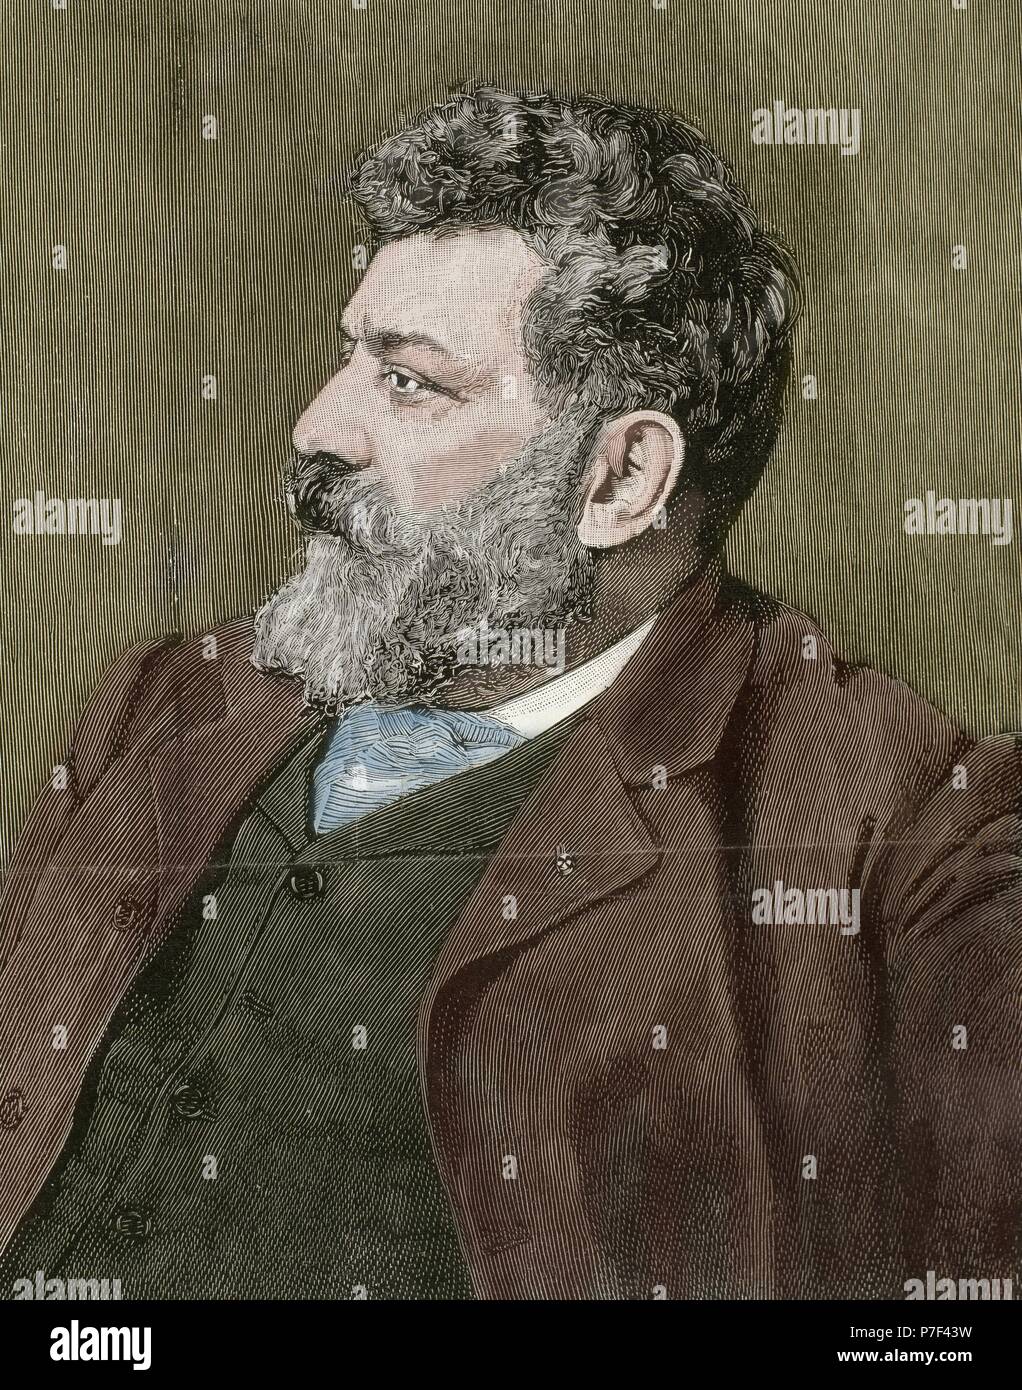 Francisco Domingo Marques (1842-1920). Spanish painter. Eclictic style. Portrait. Engraving. 19th century. Colored. Stock Photo